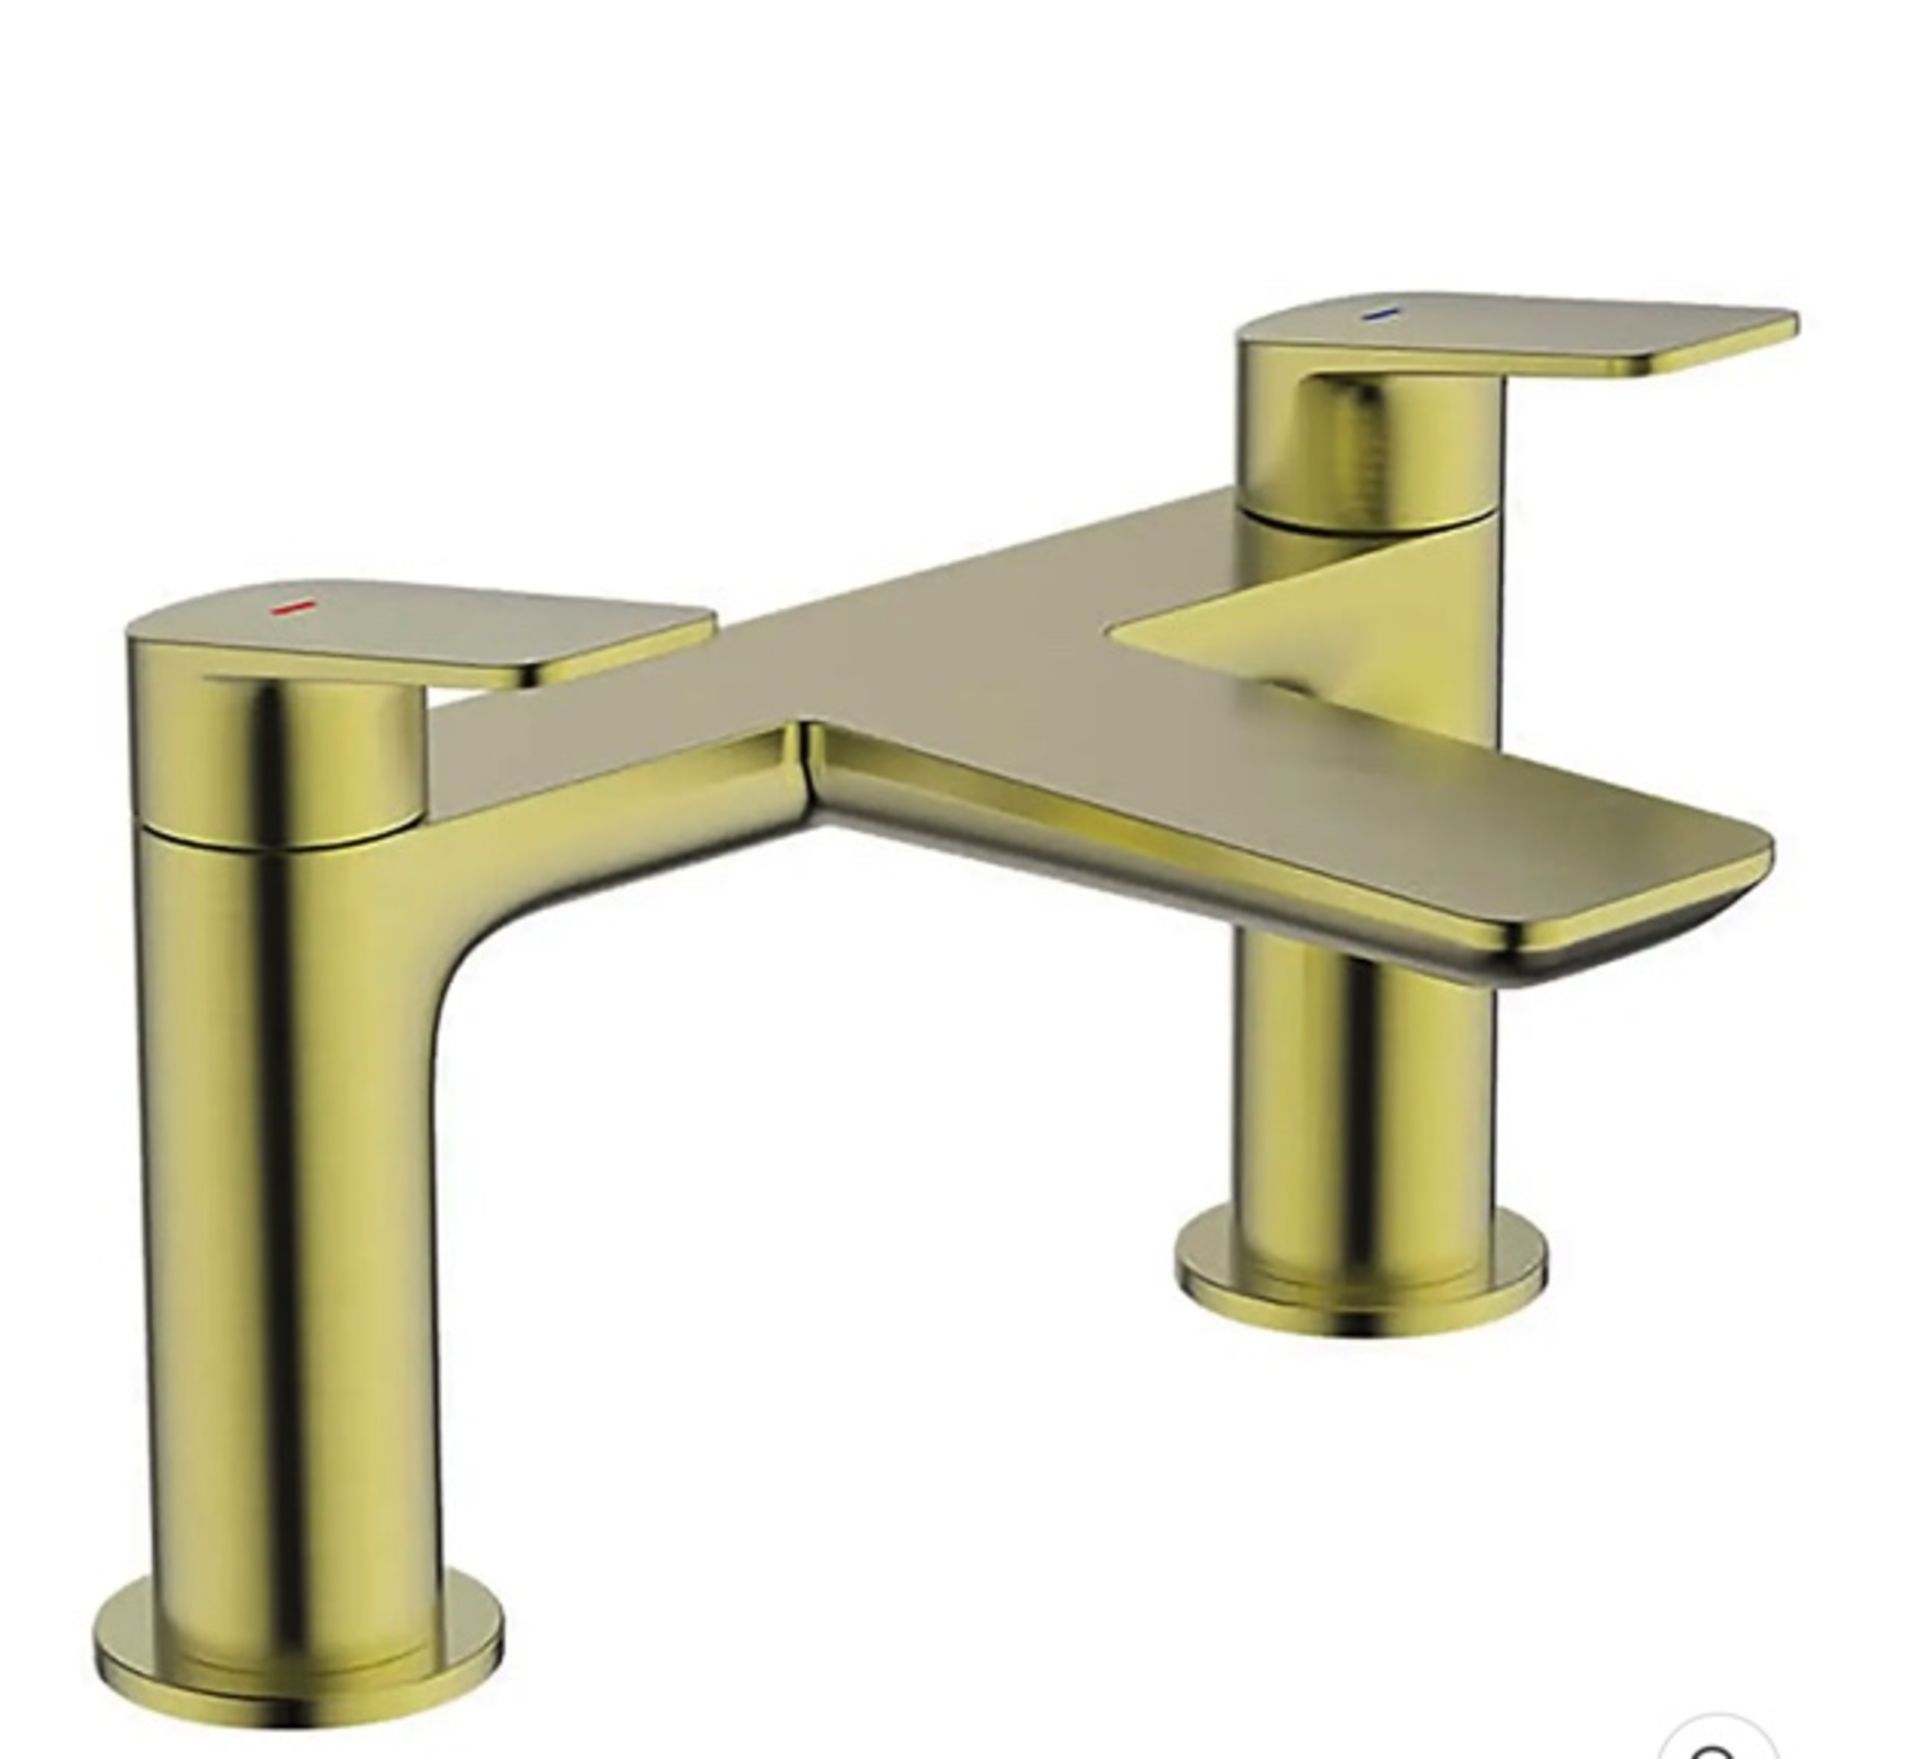 Brand New Boxed Aero Deck Mounted Bath Filler Tap - Brushed Brass RRP £130 *No Vat*